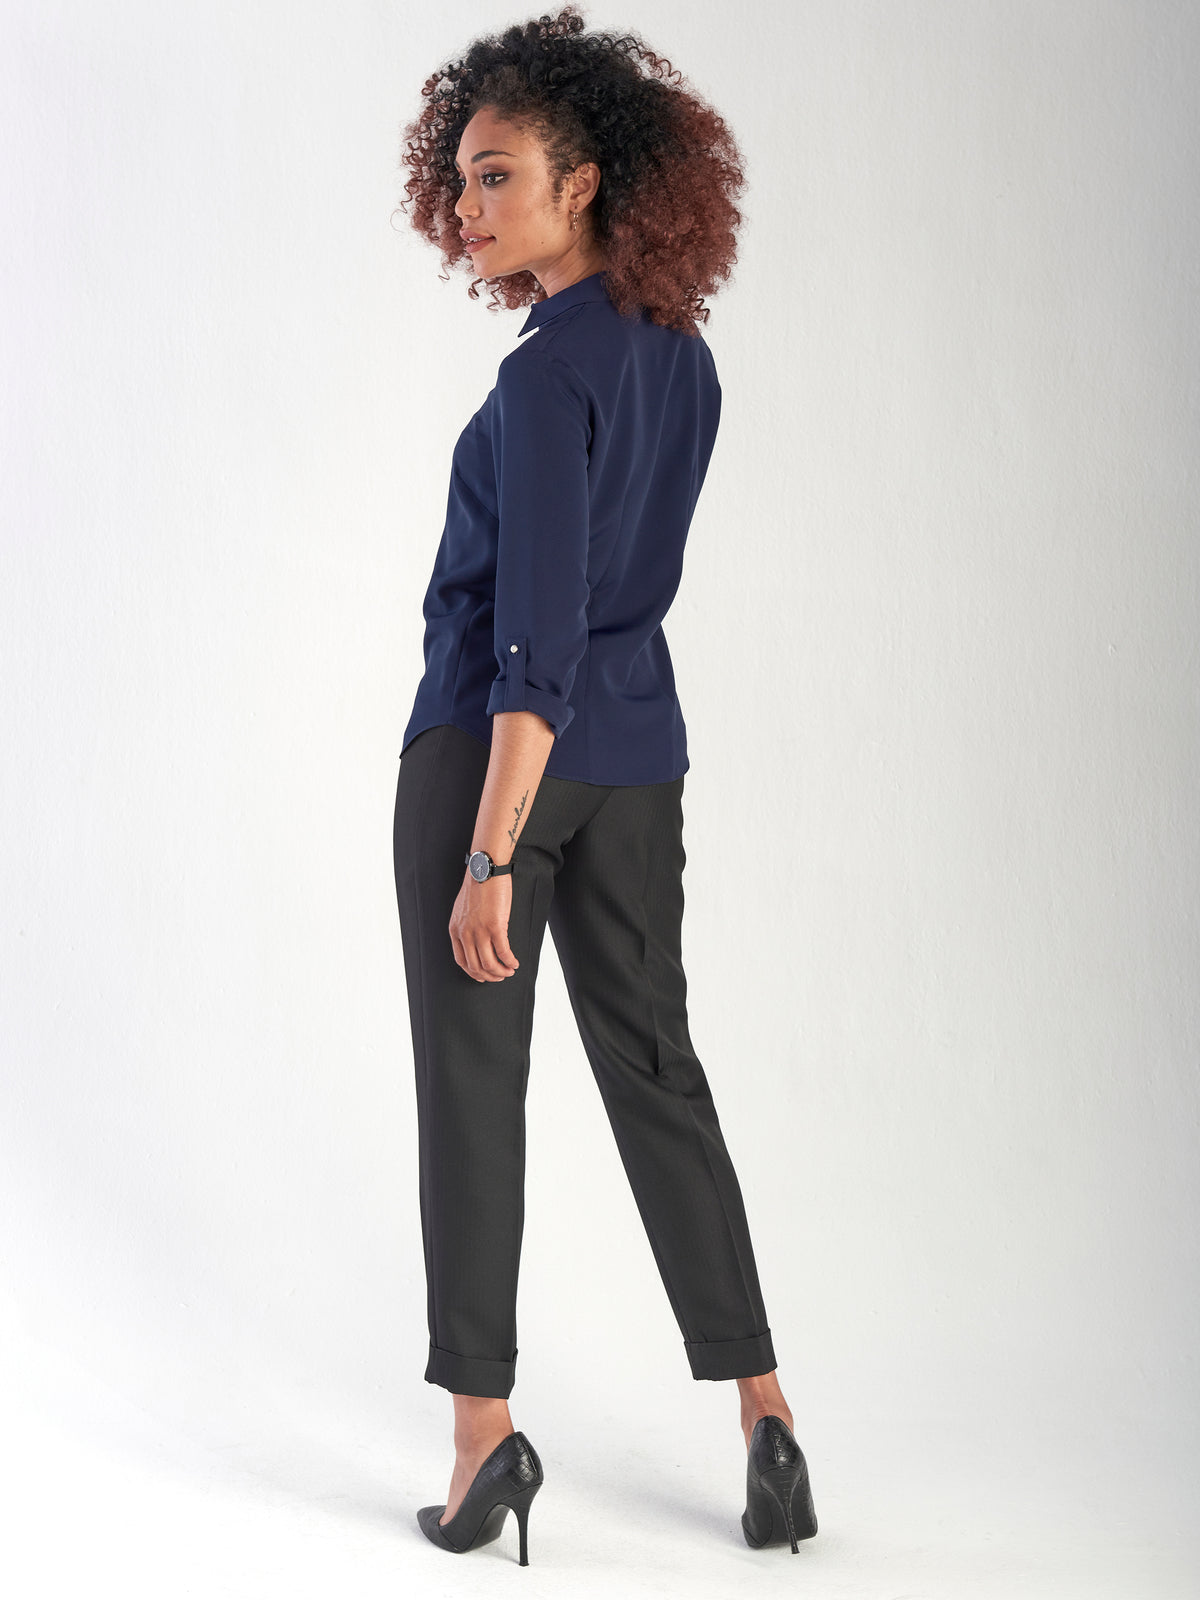 Cathy classic buttoned shirt - navy